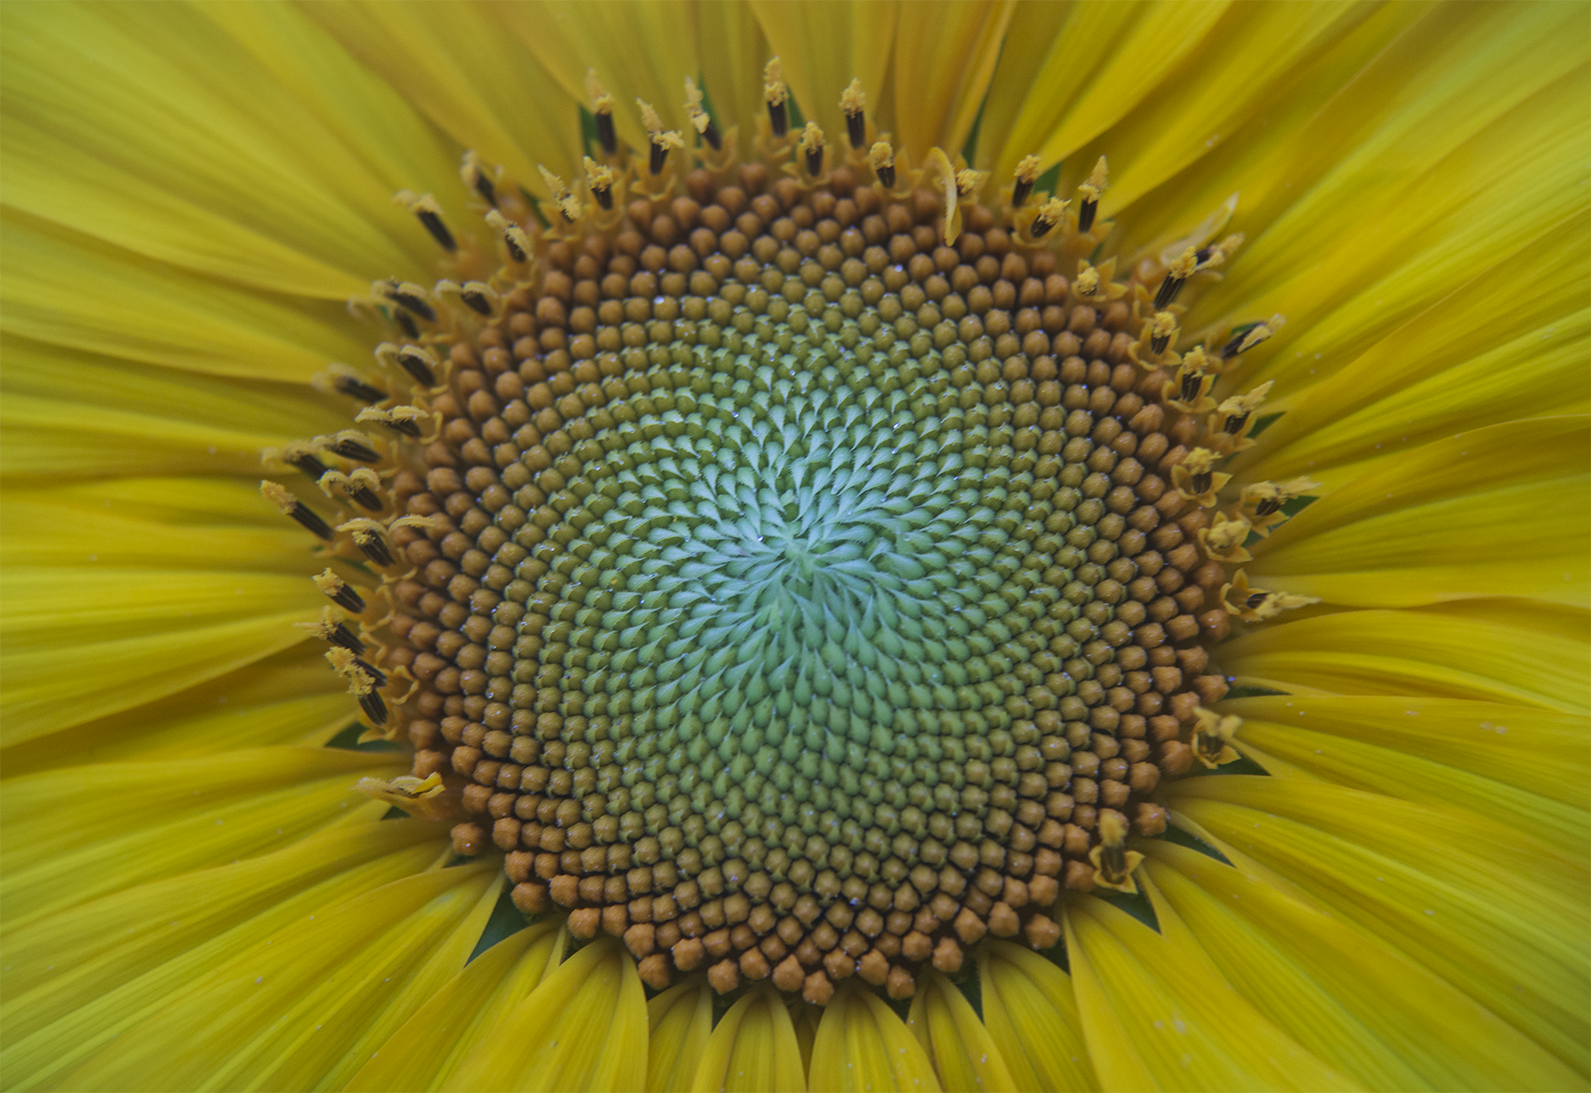 r79-sunflower-1-compressed.png